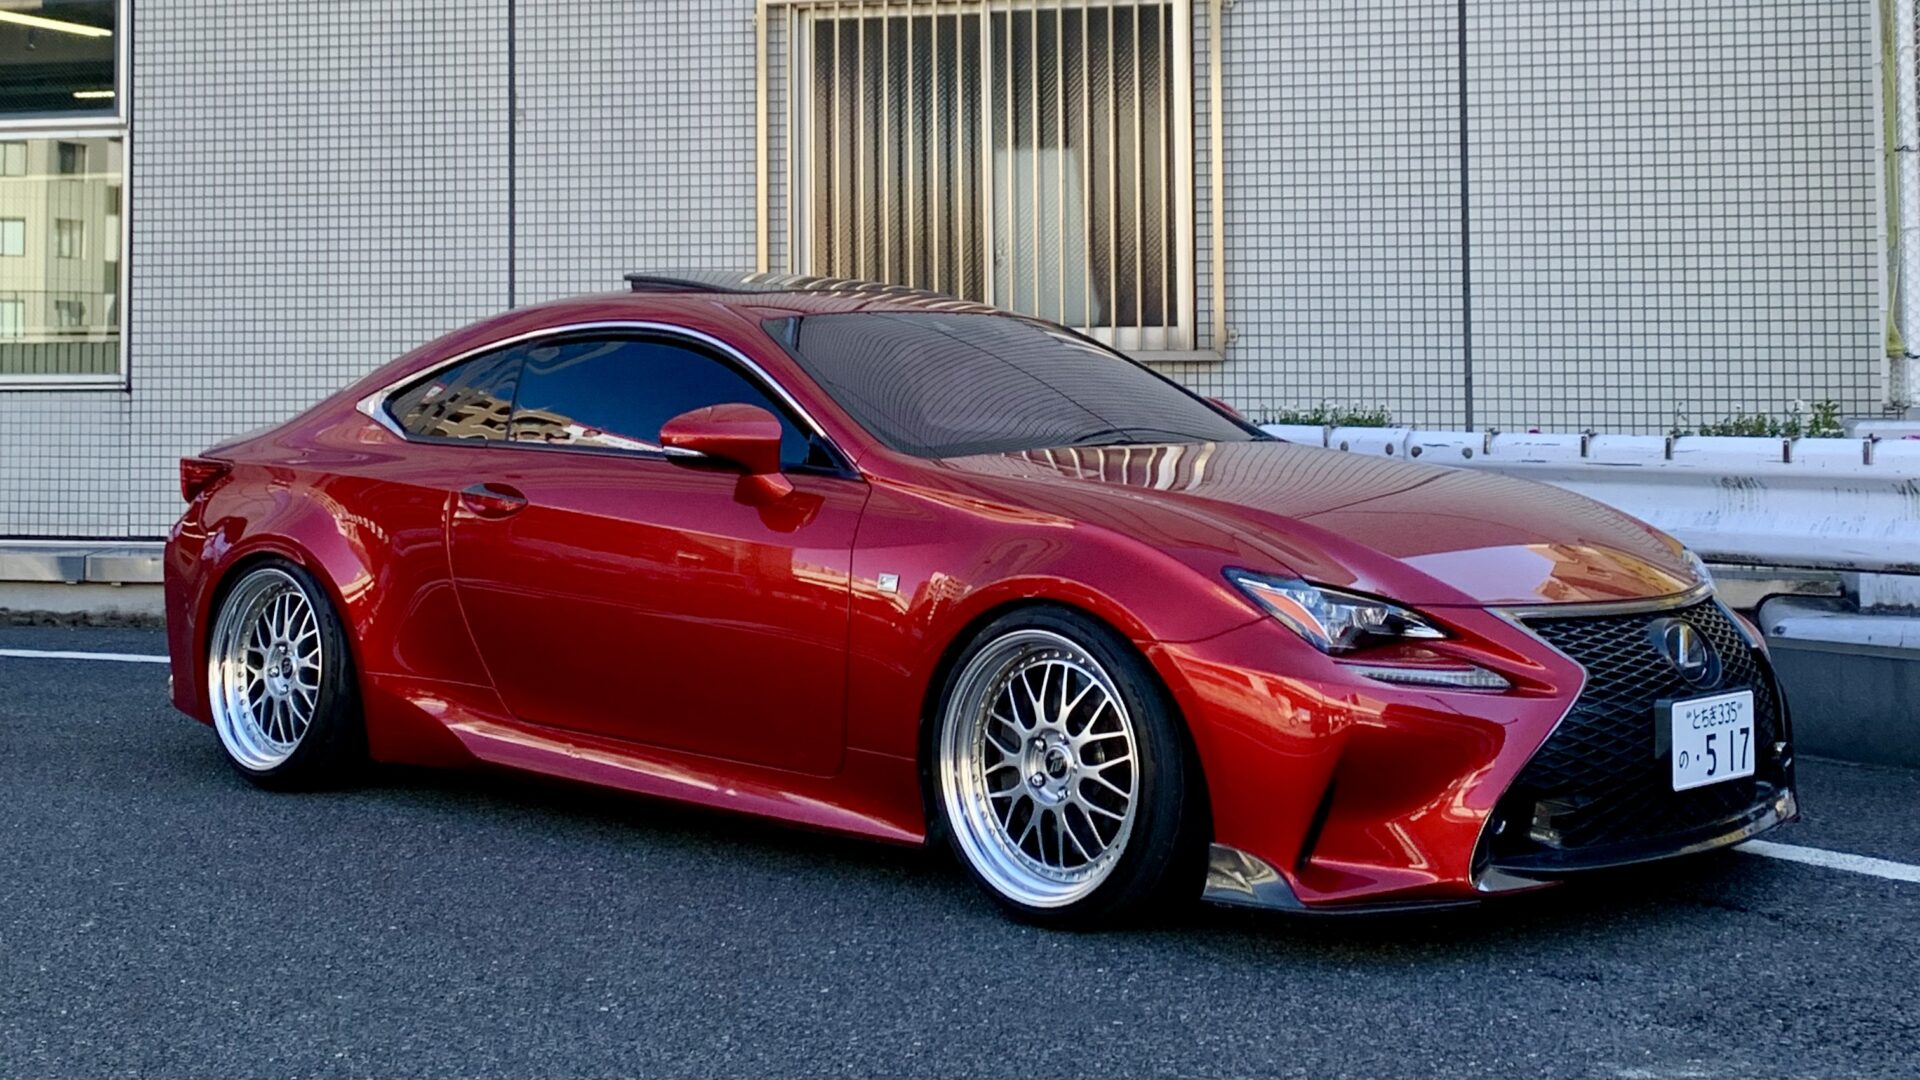 Lexus RC350 栃木からバブリング施工依頼頂きました！